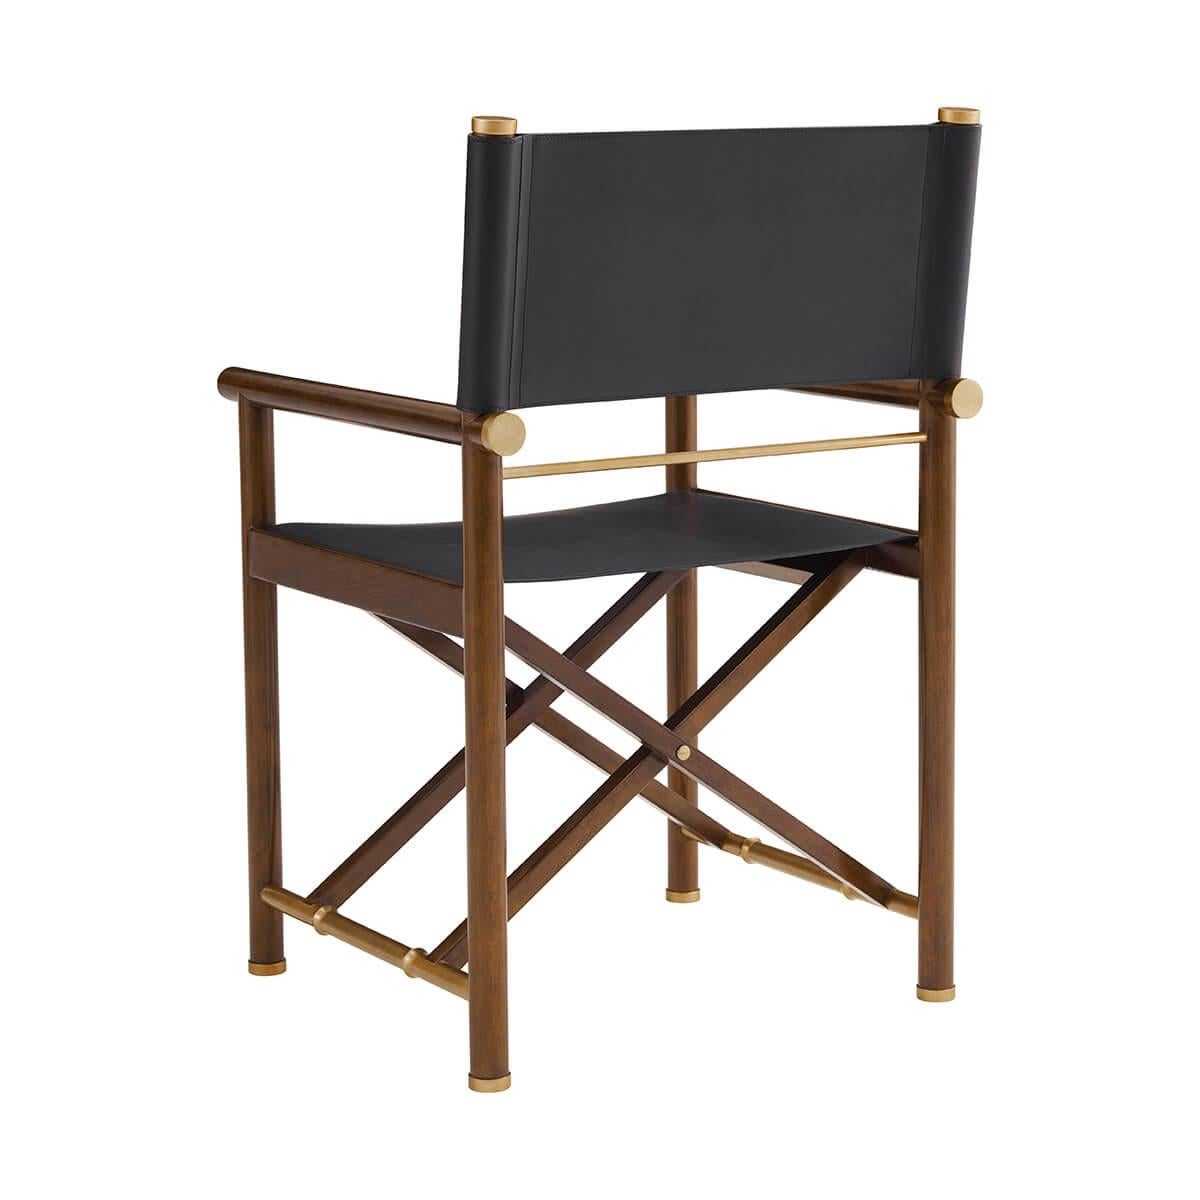 This chair features a sophisticated black leather backrest and seat, paired with a rich wooden beech frame and elegant brass accents for a touch of luxury.

Perfect for those who appreciate timeless style with a modern twist. Ideal for a chic home